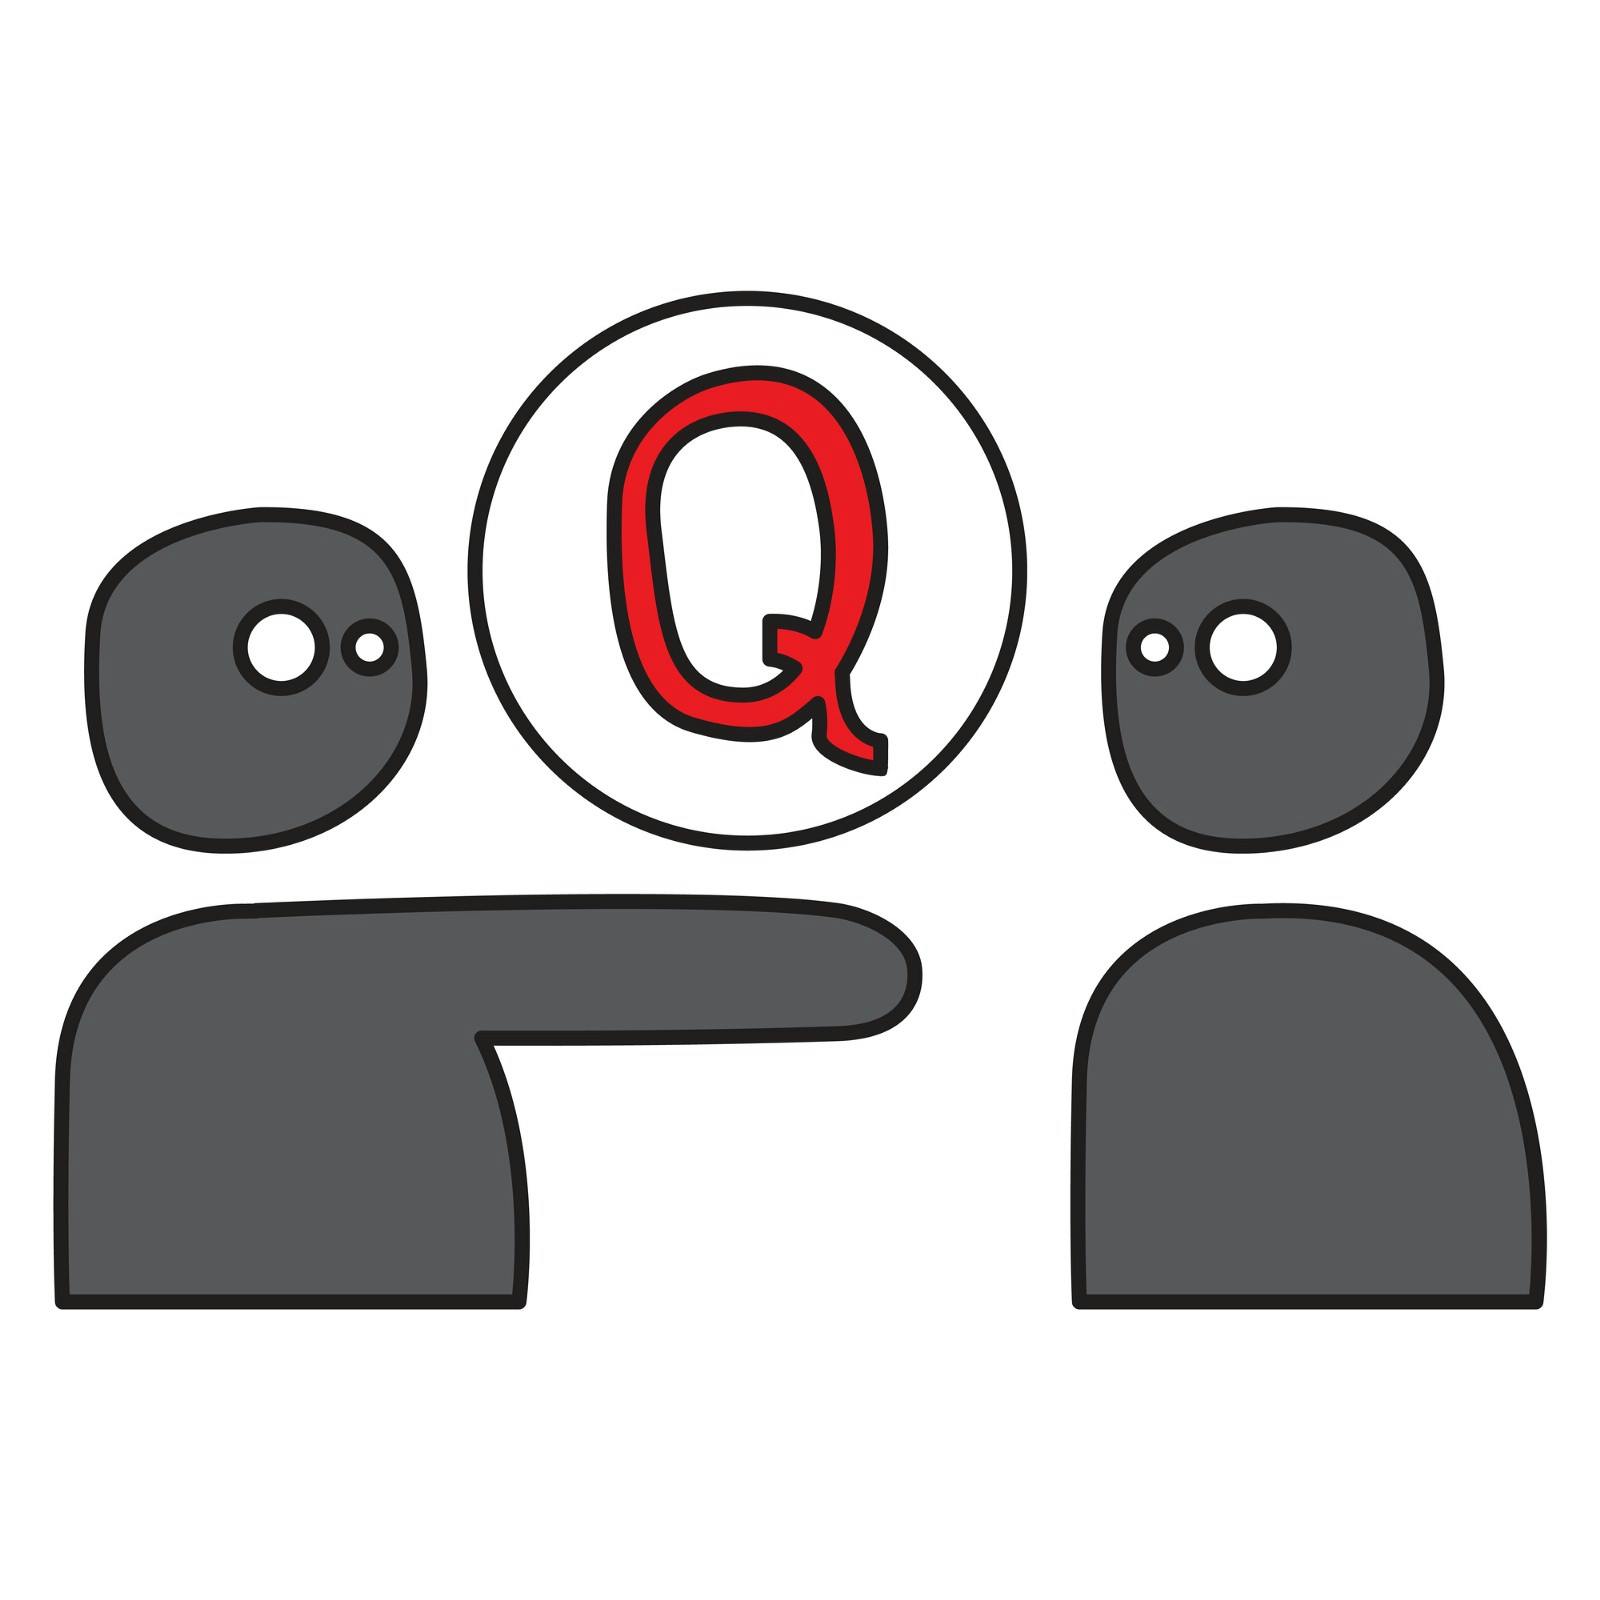 /whats-the-business-of-quora-it-s-about-asking-the-right-question-7f6049d9b12e feature image